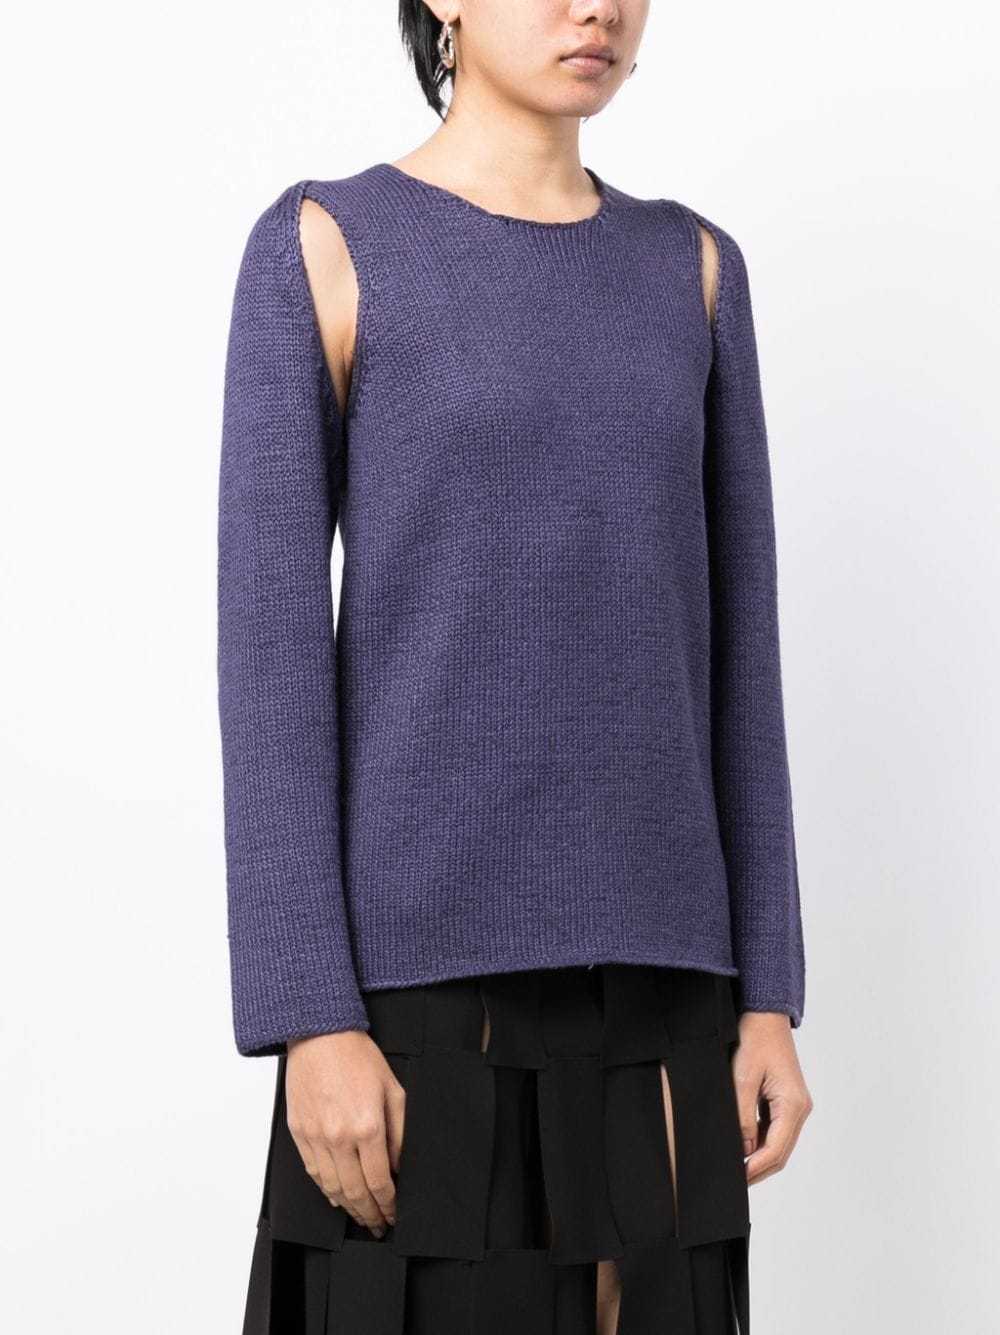 Hermès Pre-Owned 1990-2000s two-piece knit top - … - image 3